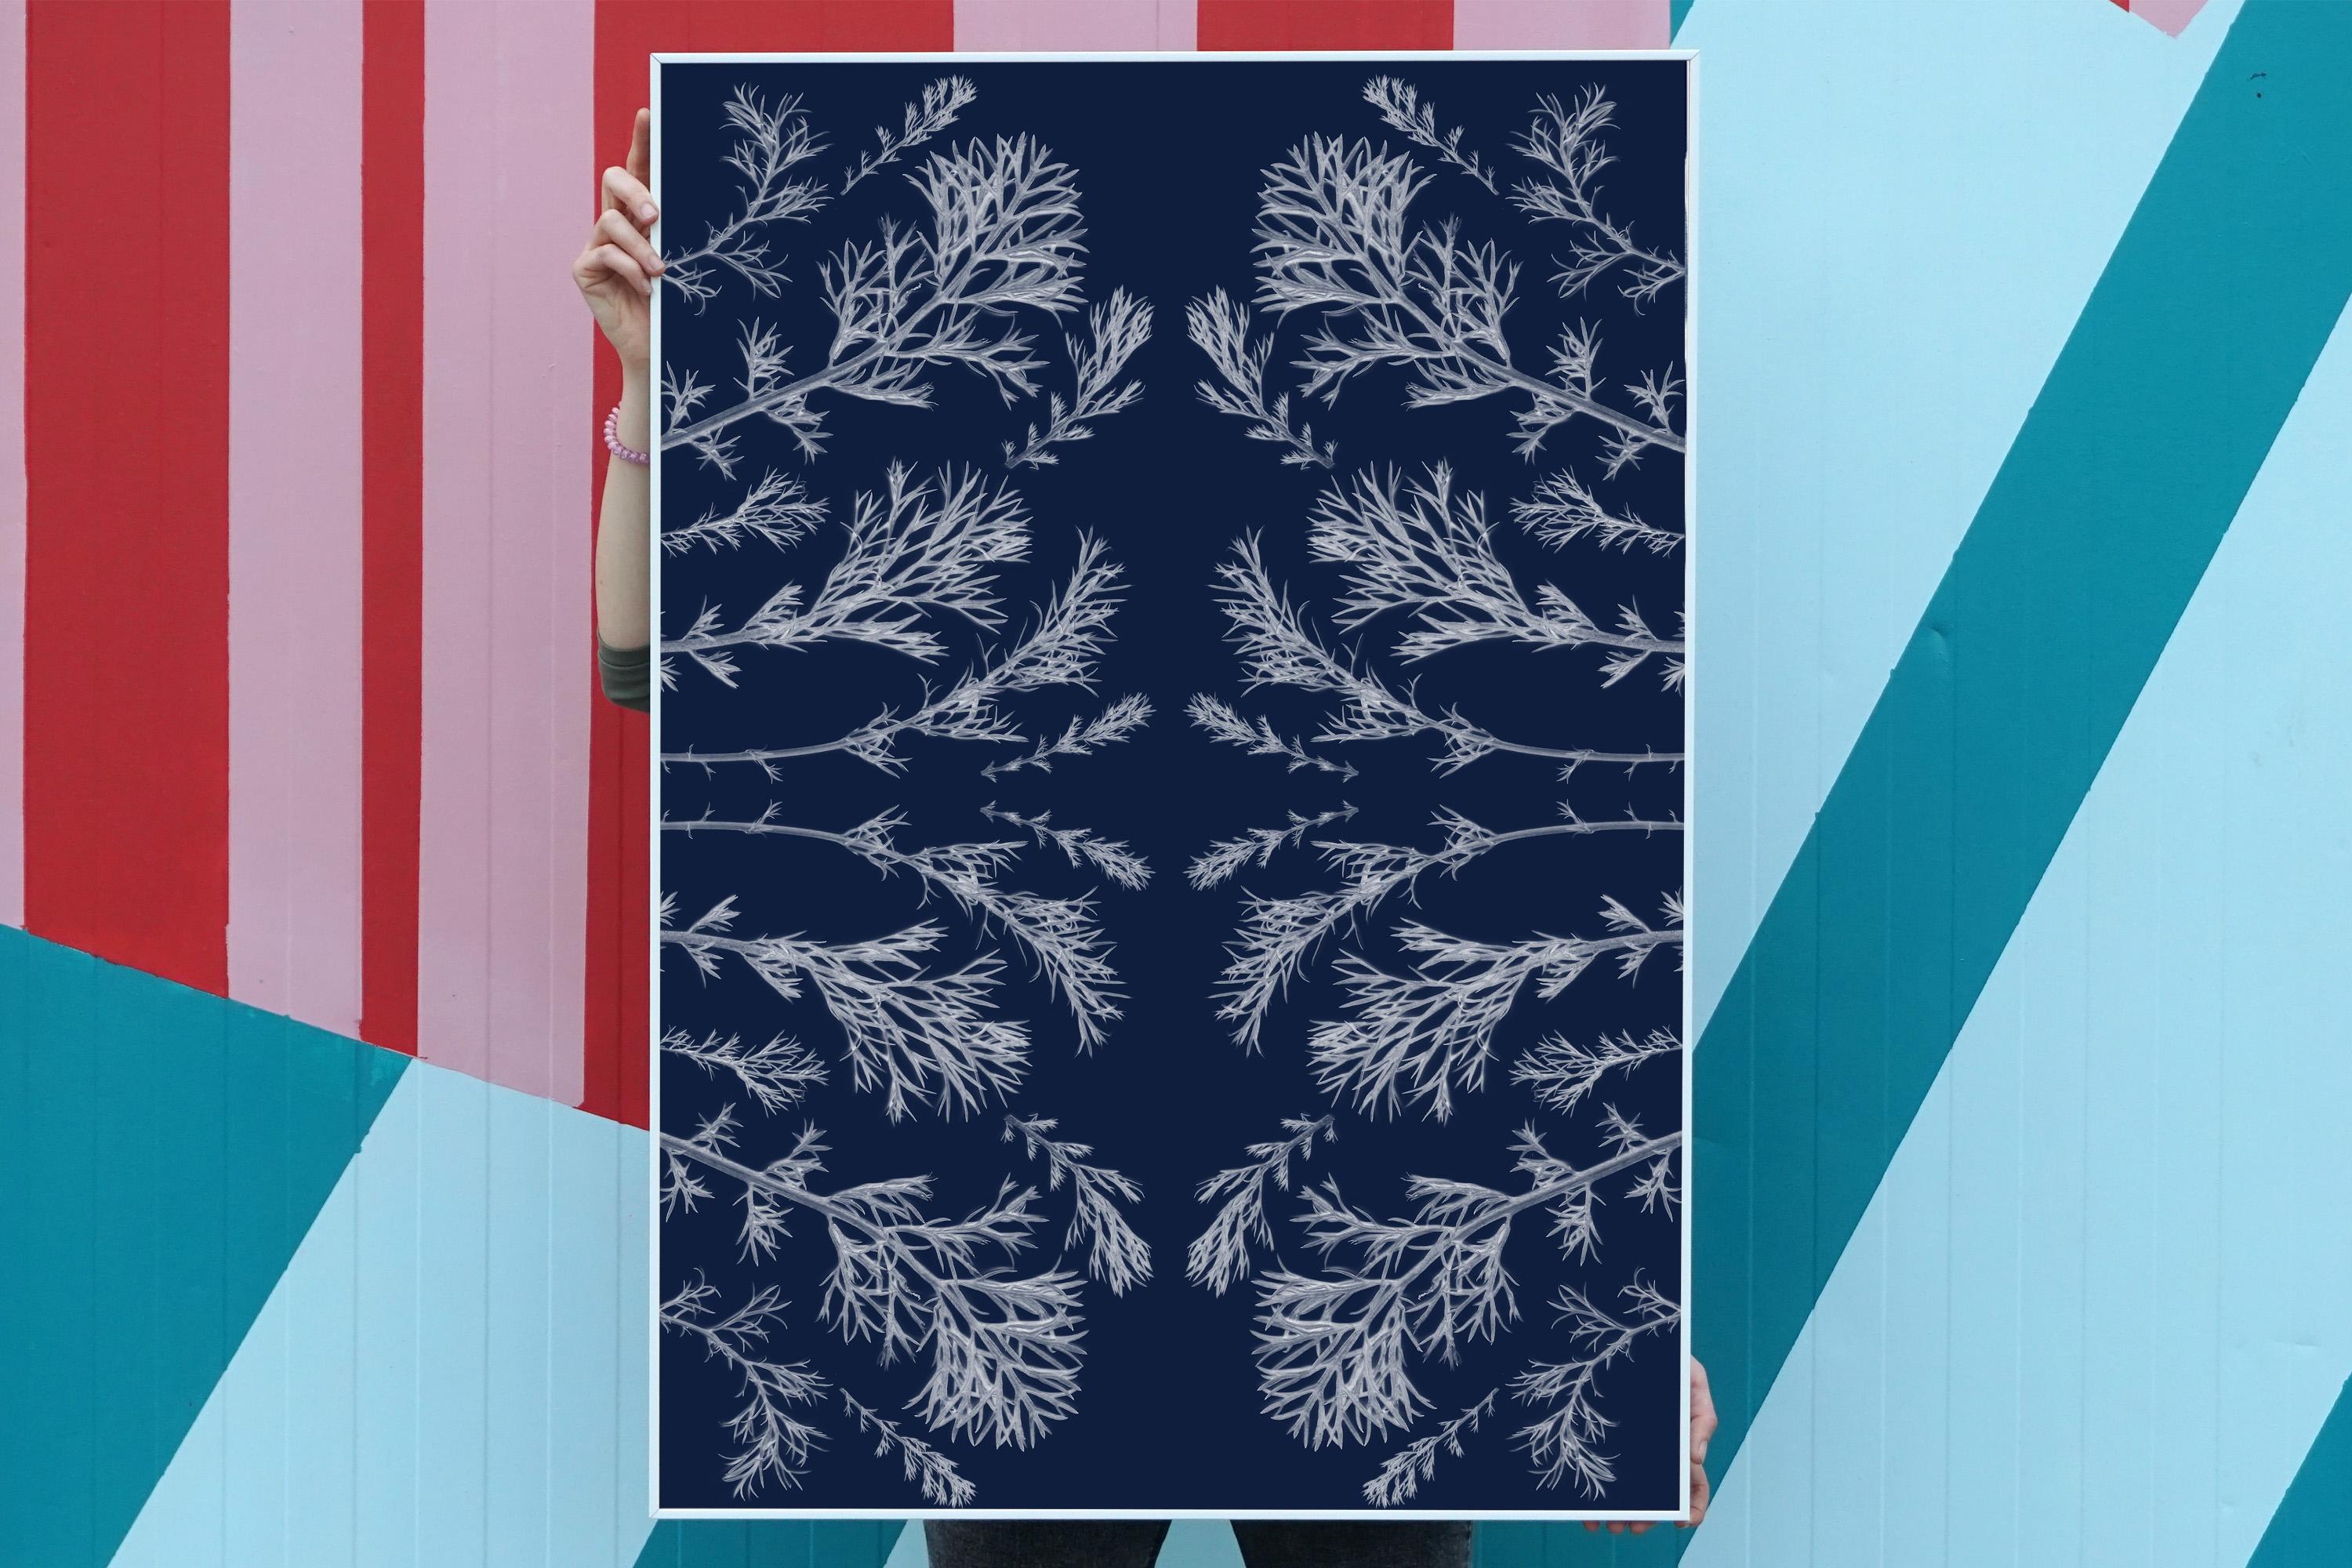 Plant pressed Cyanotype, Kaleidoscopic, Handmade in Sunlight, Limited Edition  - Black Landscape Print by Kind of Cyan